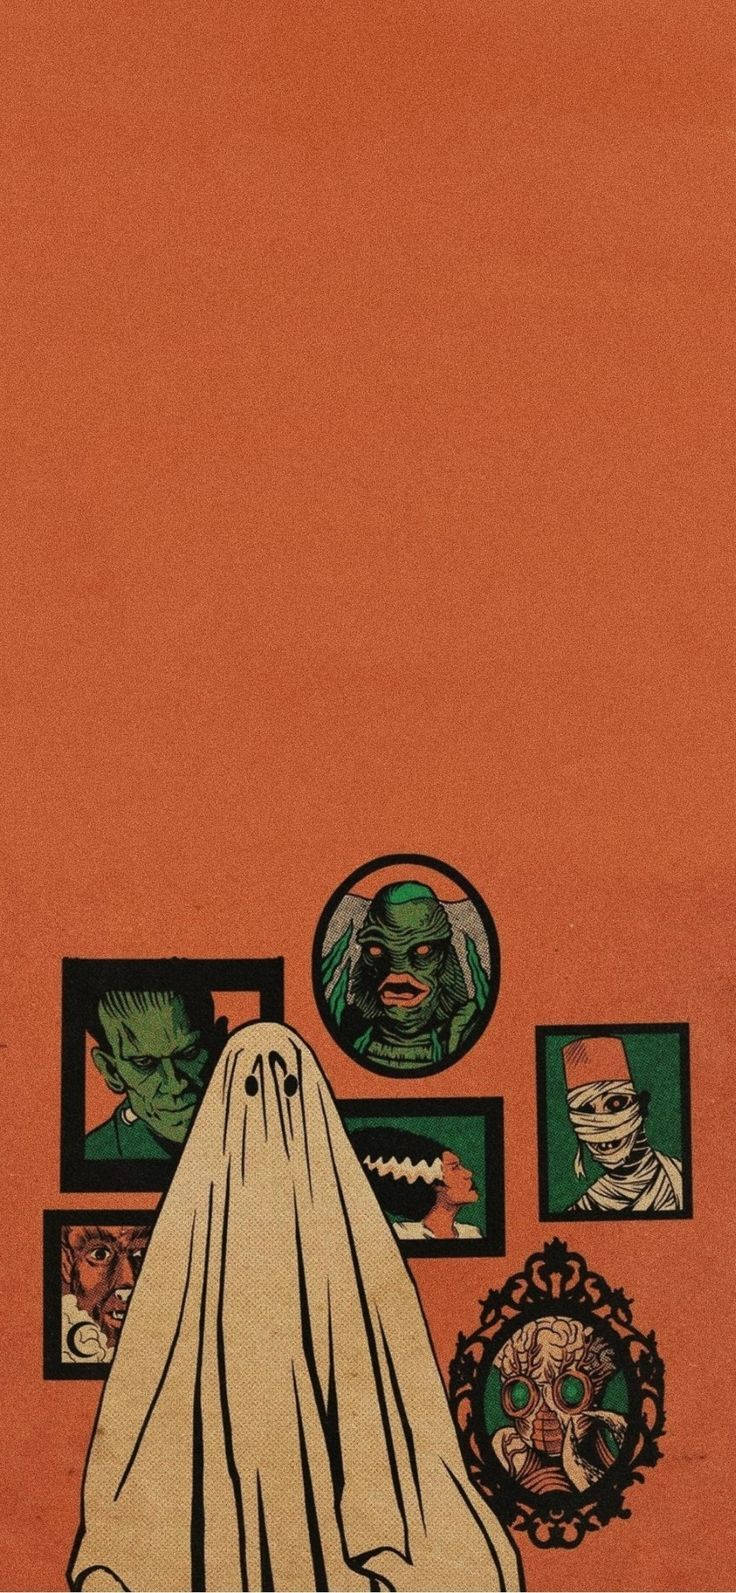 a comic book cover with a ghost in the background Wallpaper